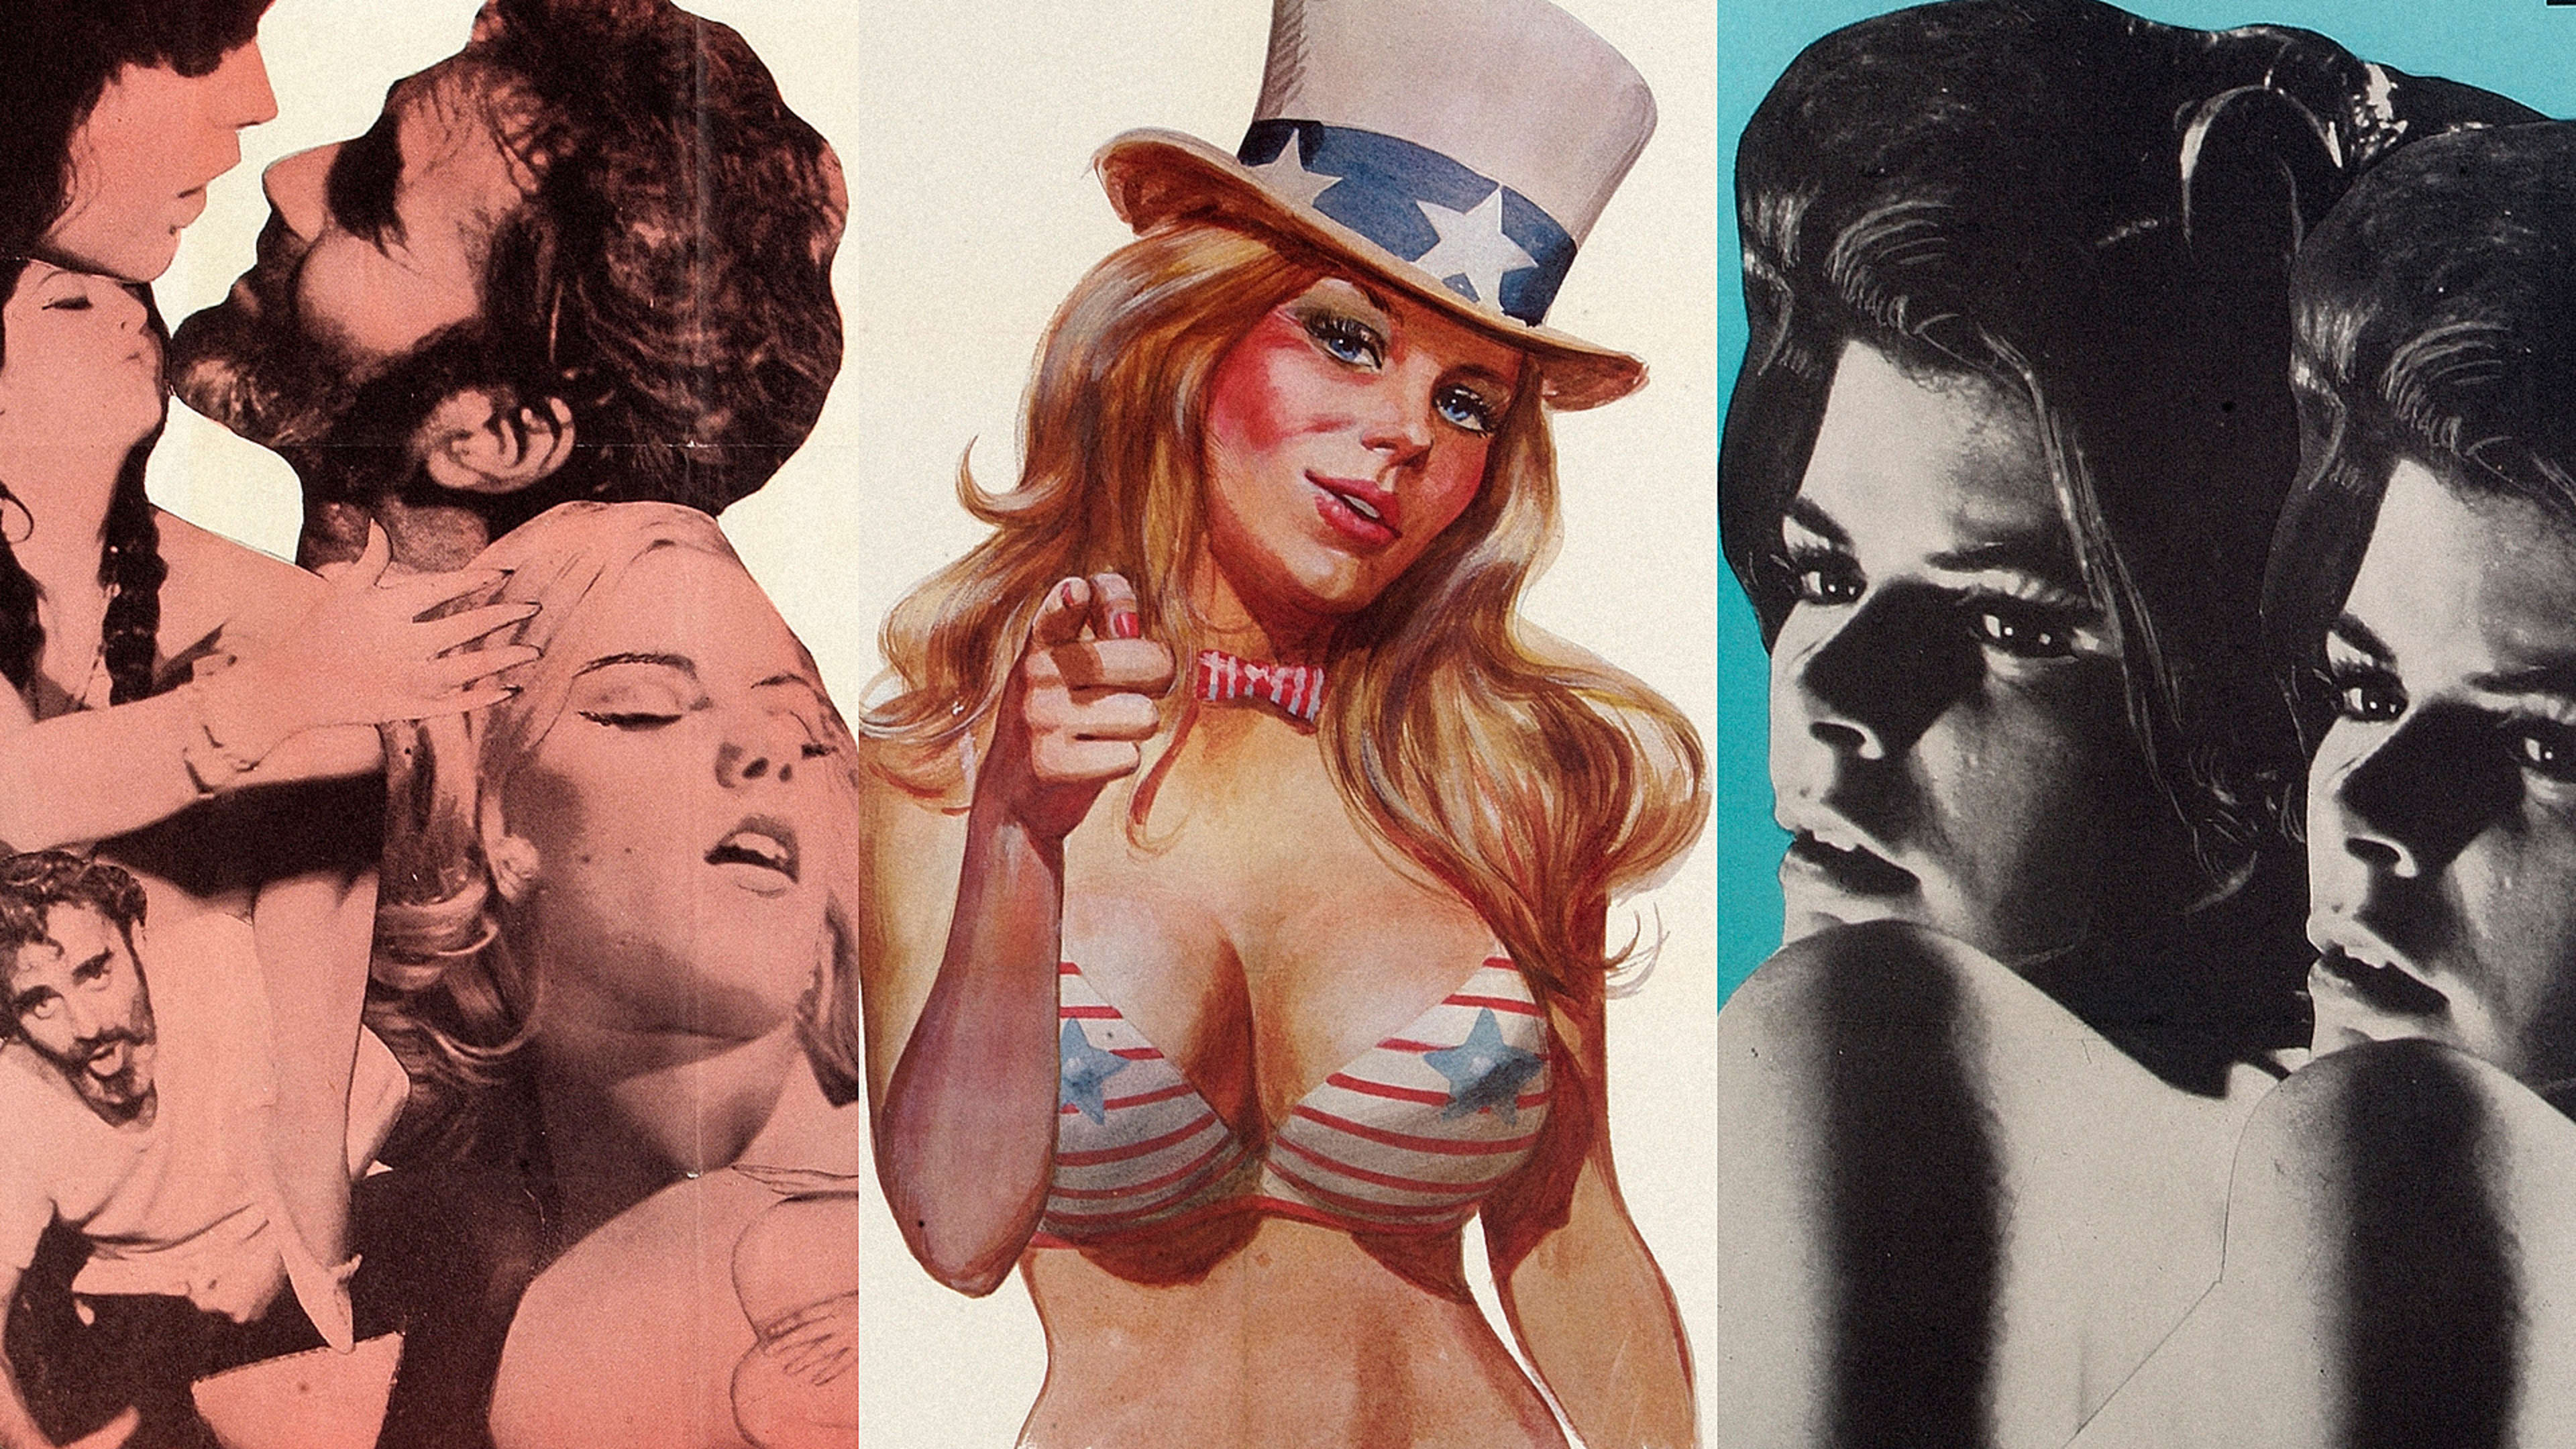 1970s - The Glorious Graphic Design Of '70s Porn (NSFW) - Fast Company